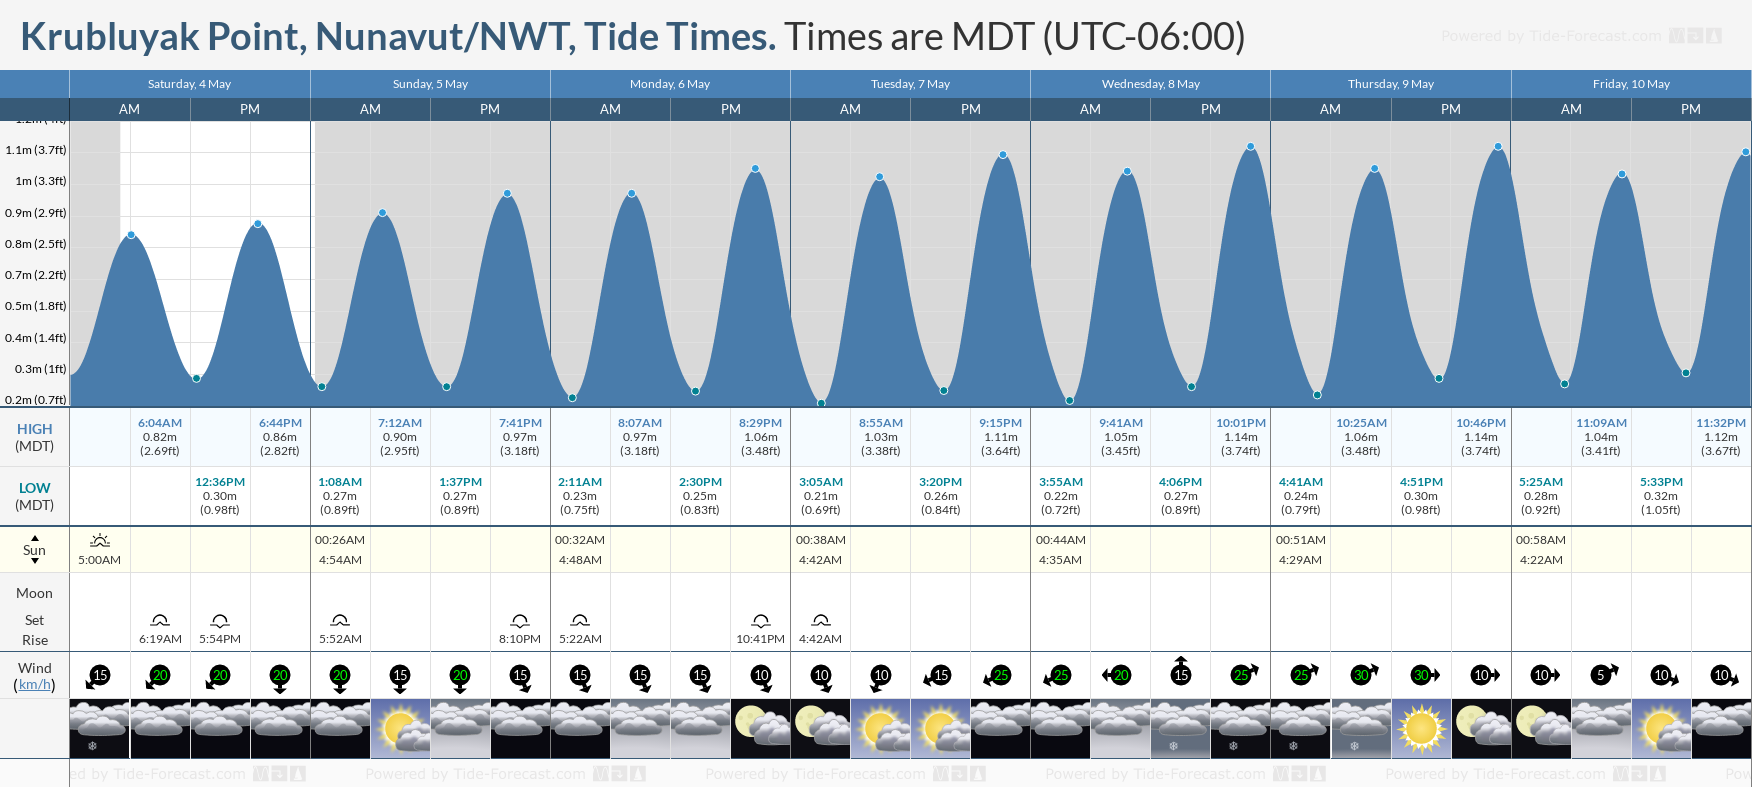 Krubluyak Point, Nunavut/NWT Tide Chart including high and low tide tide times for the next 7 days